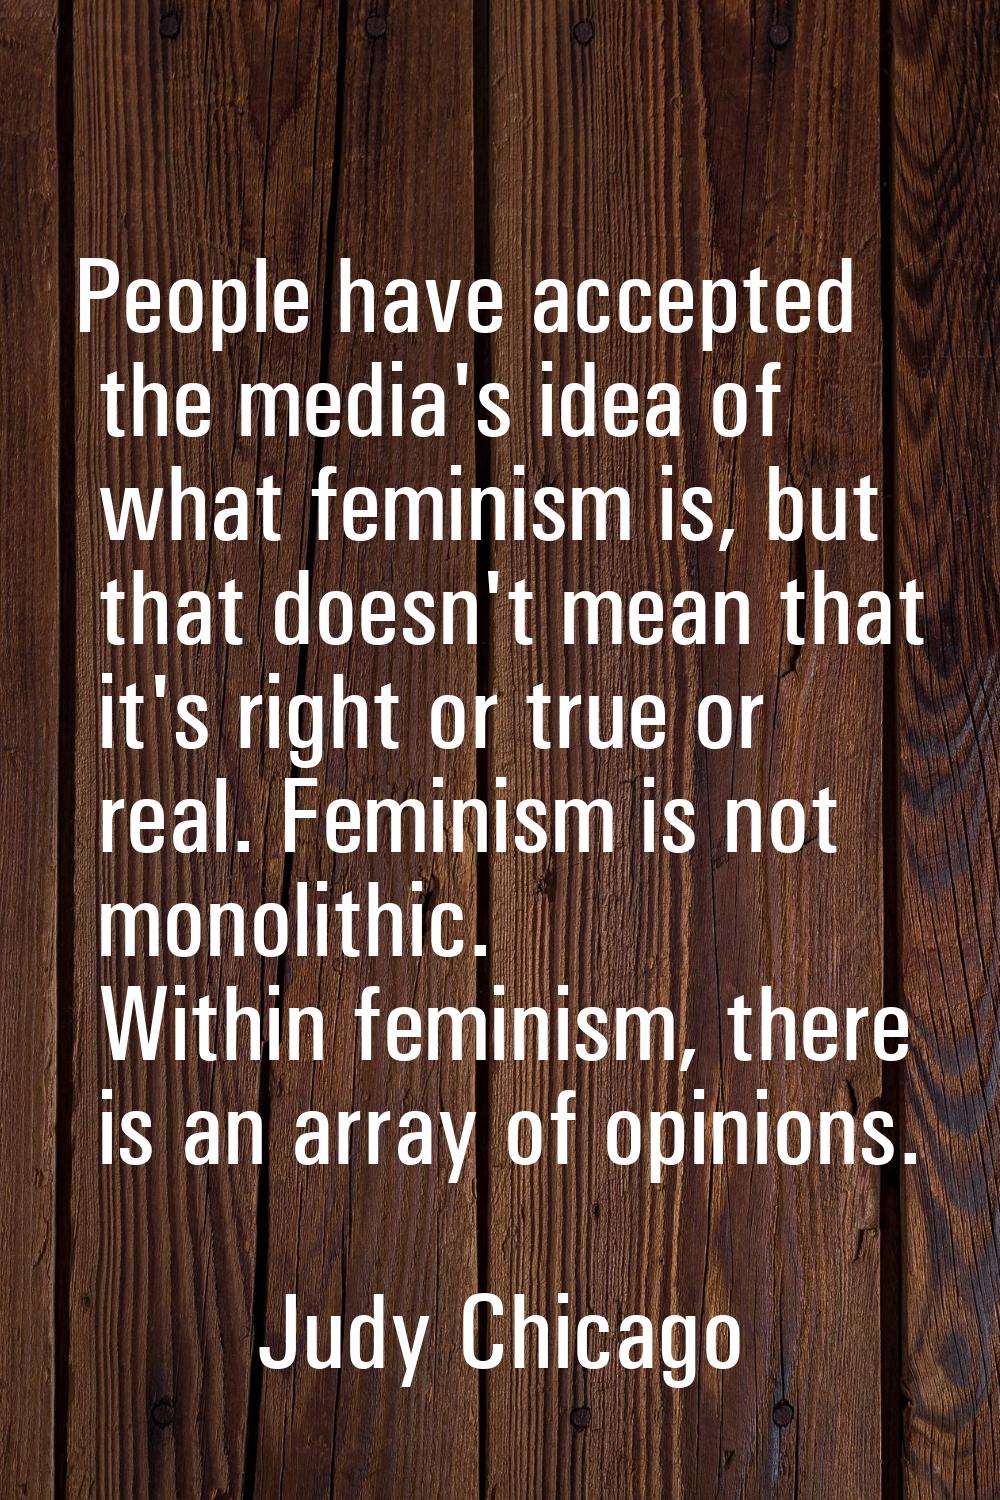 People have accepted the media's idea of what feminism is, but that doesn't mean that it's right or